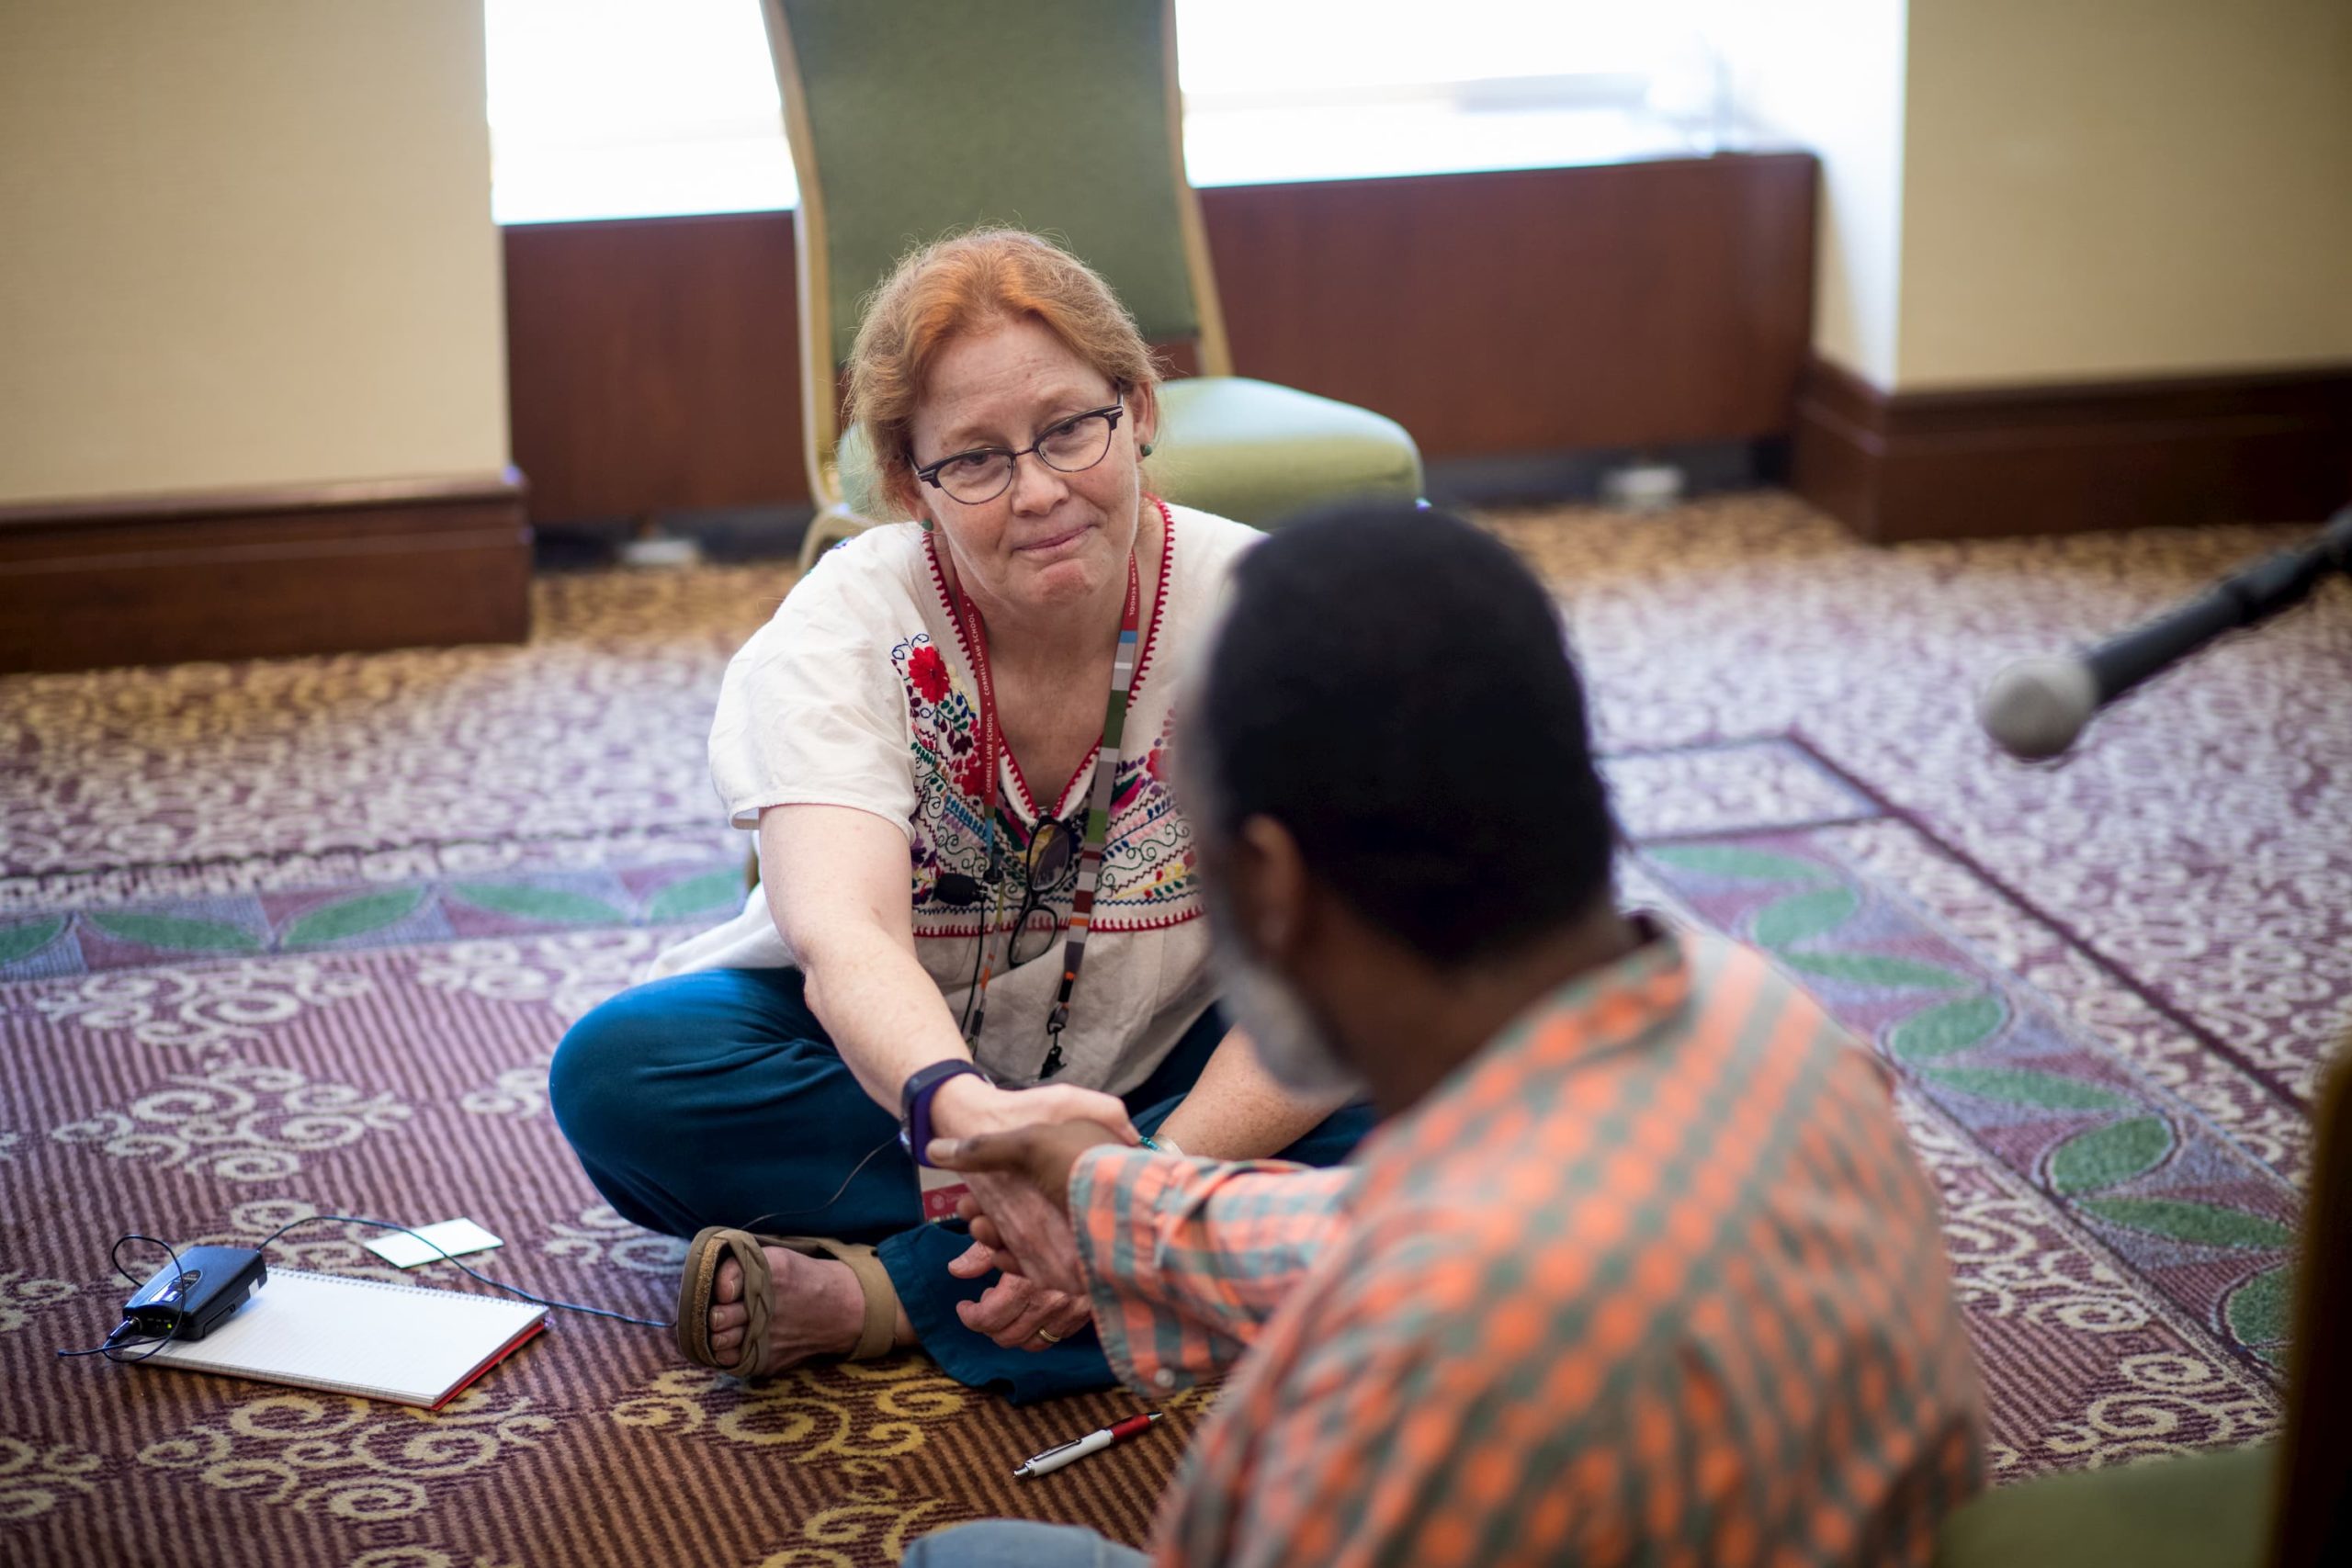 A woman with glasses and in a white shirt with embroidery is sitting on the ground, holding hands with a man in an orange plaid shirt.